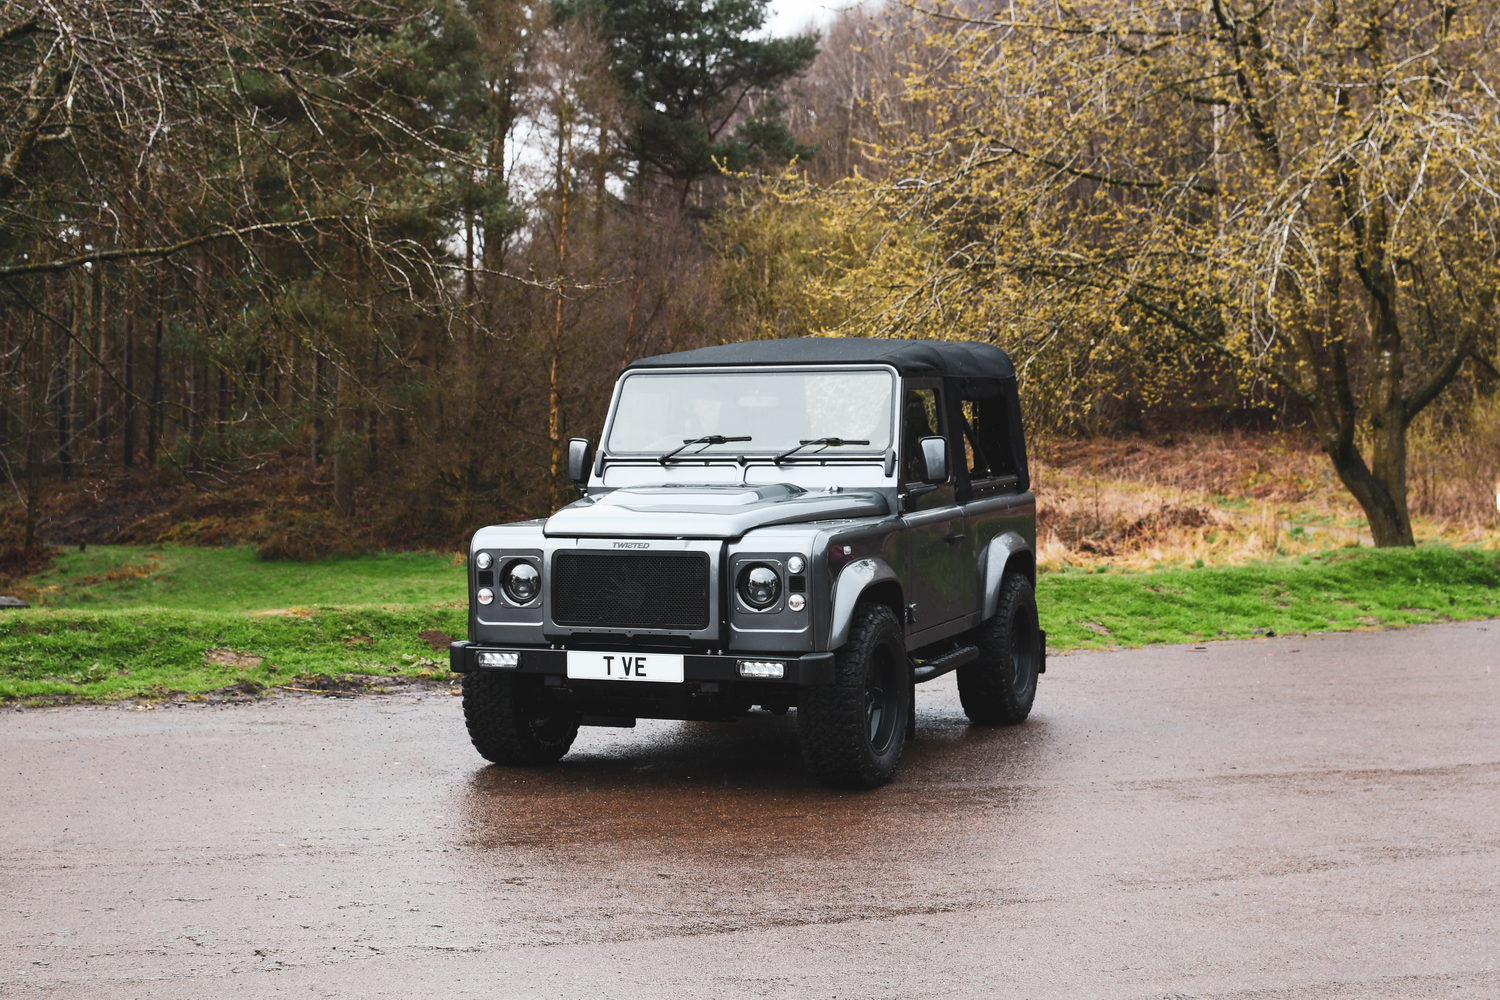 Land Rover Twisted T-VE electric (2022)